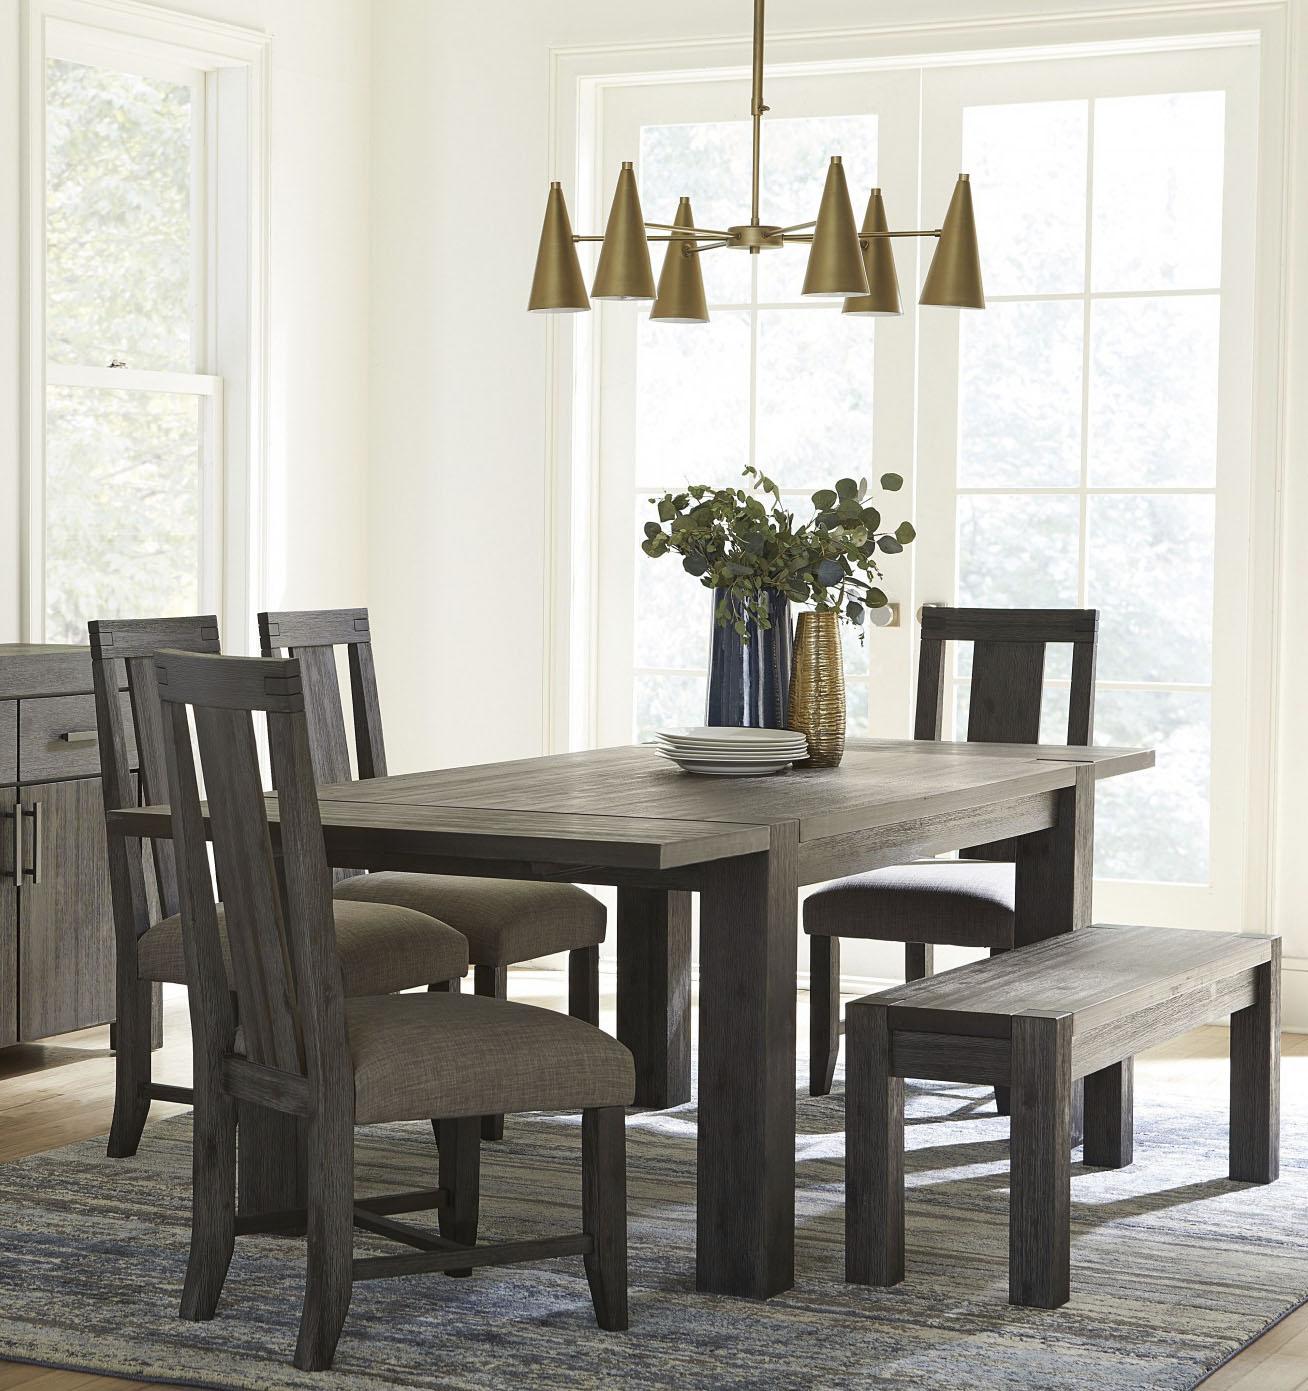 

    
Graphite Finish Acacia Solids Dining Set 6Pcs w/ Bench MEADOW by Modus Furniture
